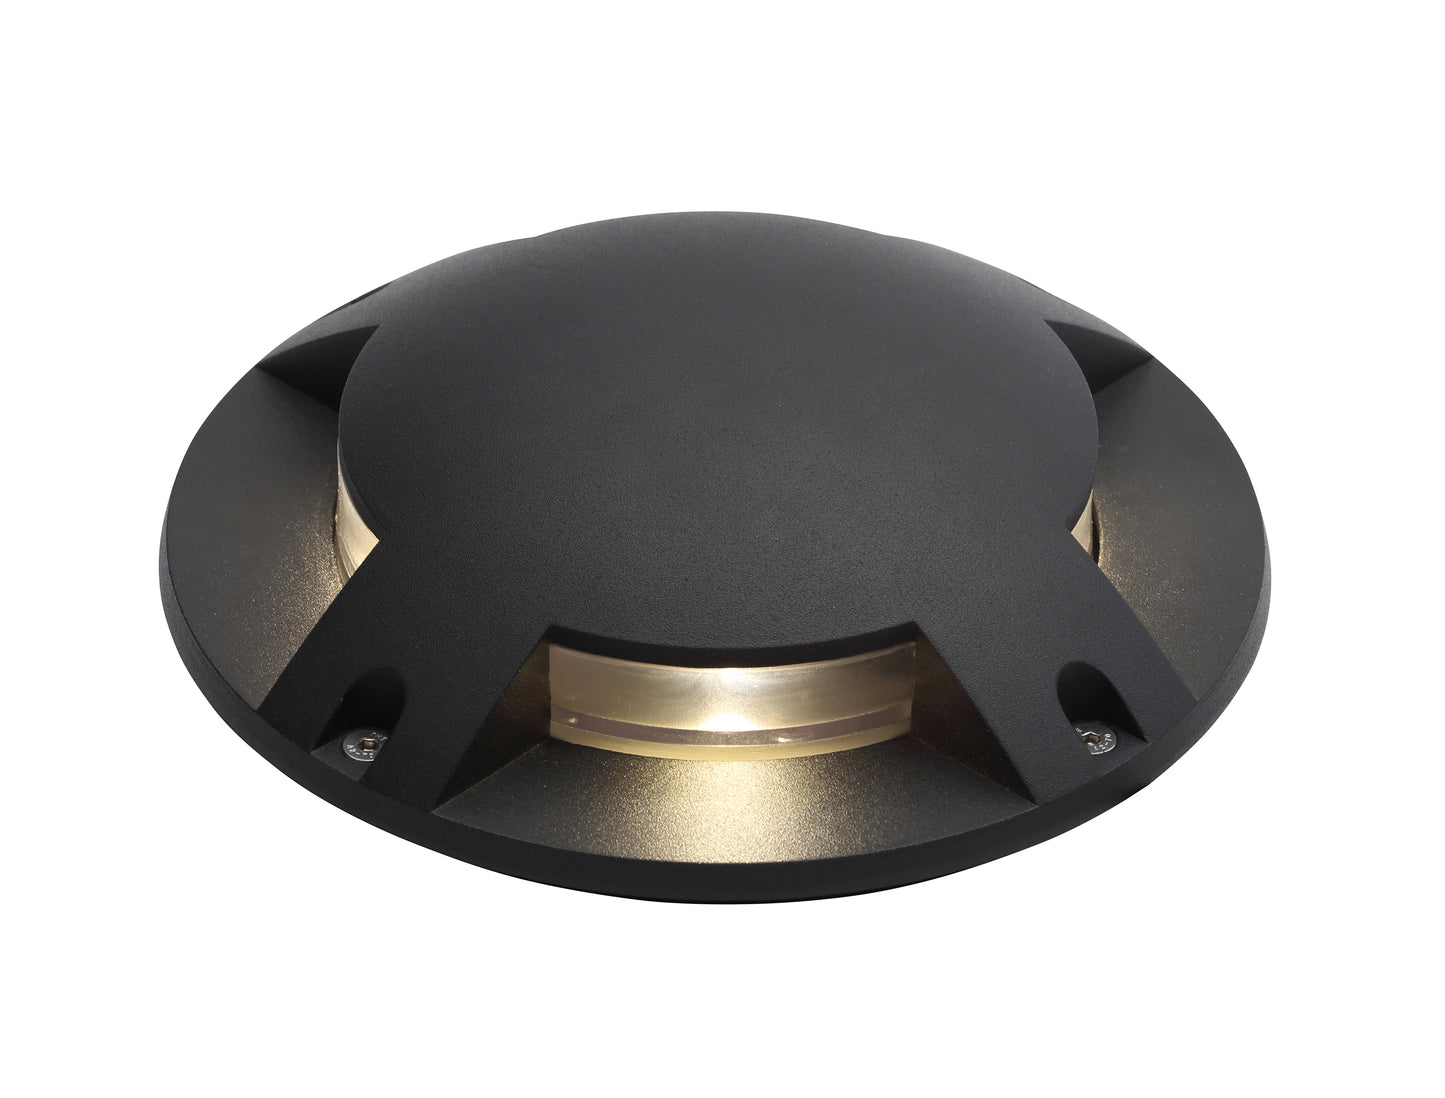 Our Apollo black outdoor surface mount ground light would look perfect in a modern or more traditional home design. Outside lights can provide atmospheric light in your garden, at the garden pathways or on the terrace as well as a great security solution. It is designed for durability and longevity with its robust material producing a fully weatherproof and water resistant light fitting.